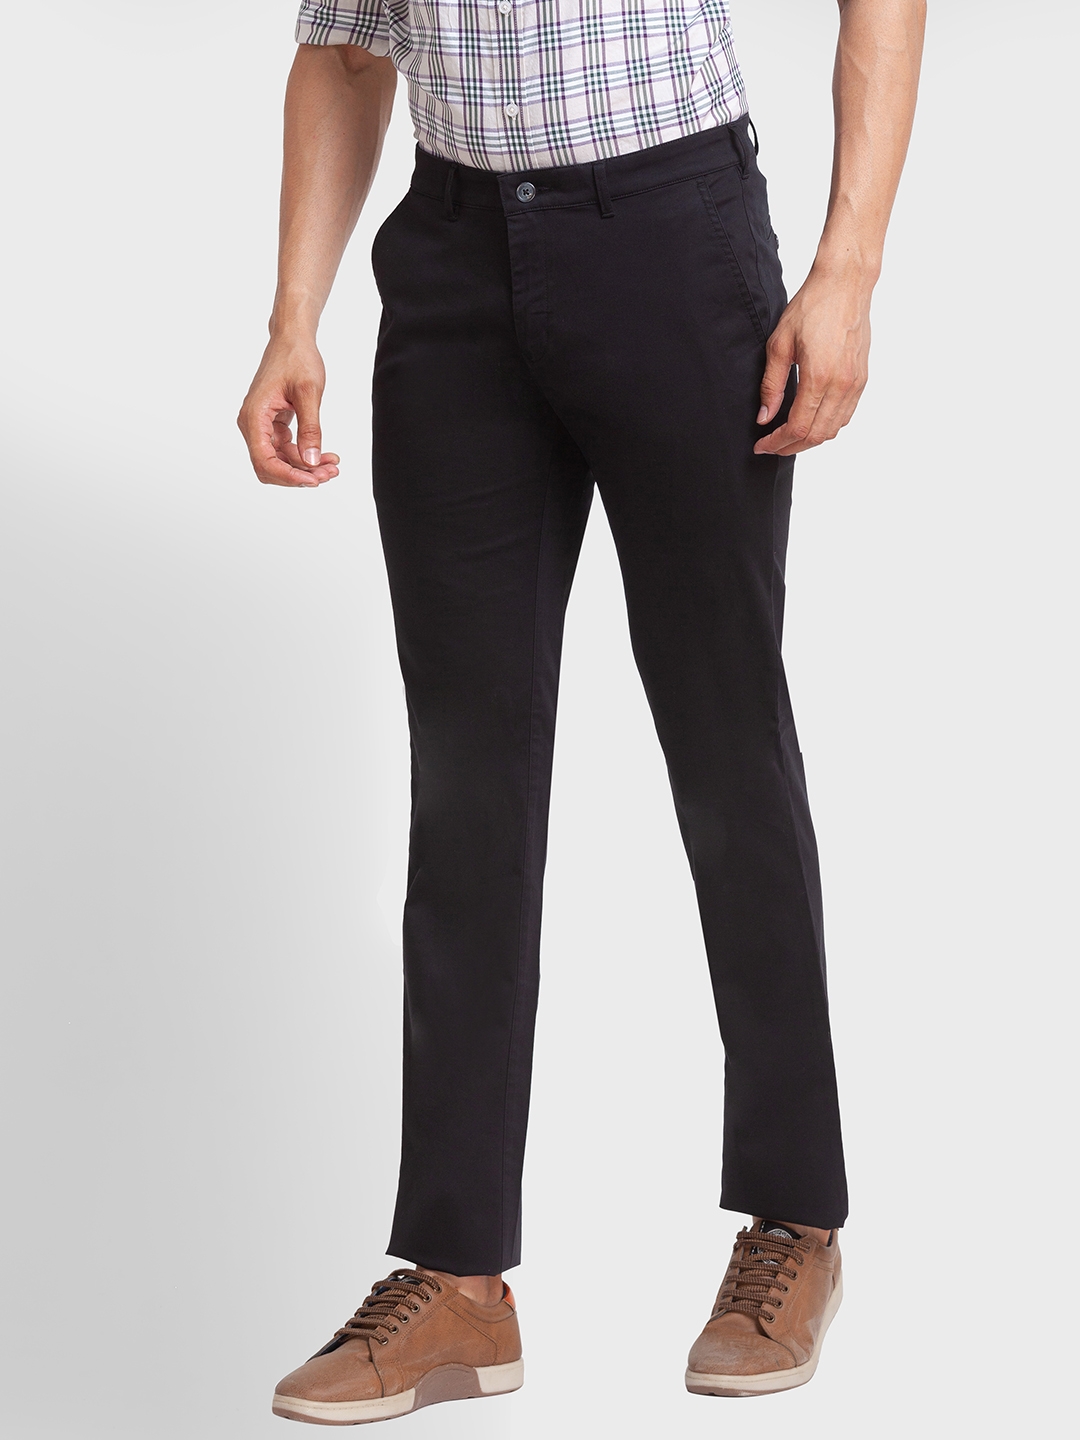 ColorPlus Casual Trousers : Buy ColorPlus Contemporary Fit Solid Grey  Trouser Online | Nykaa Fashion